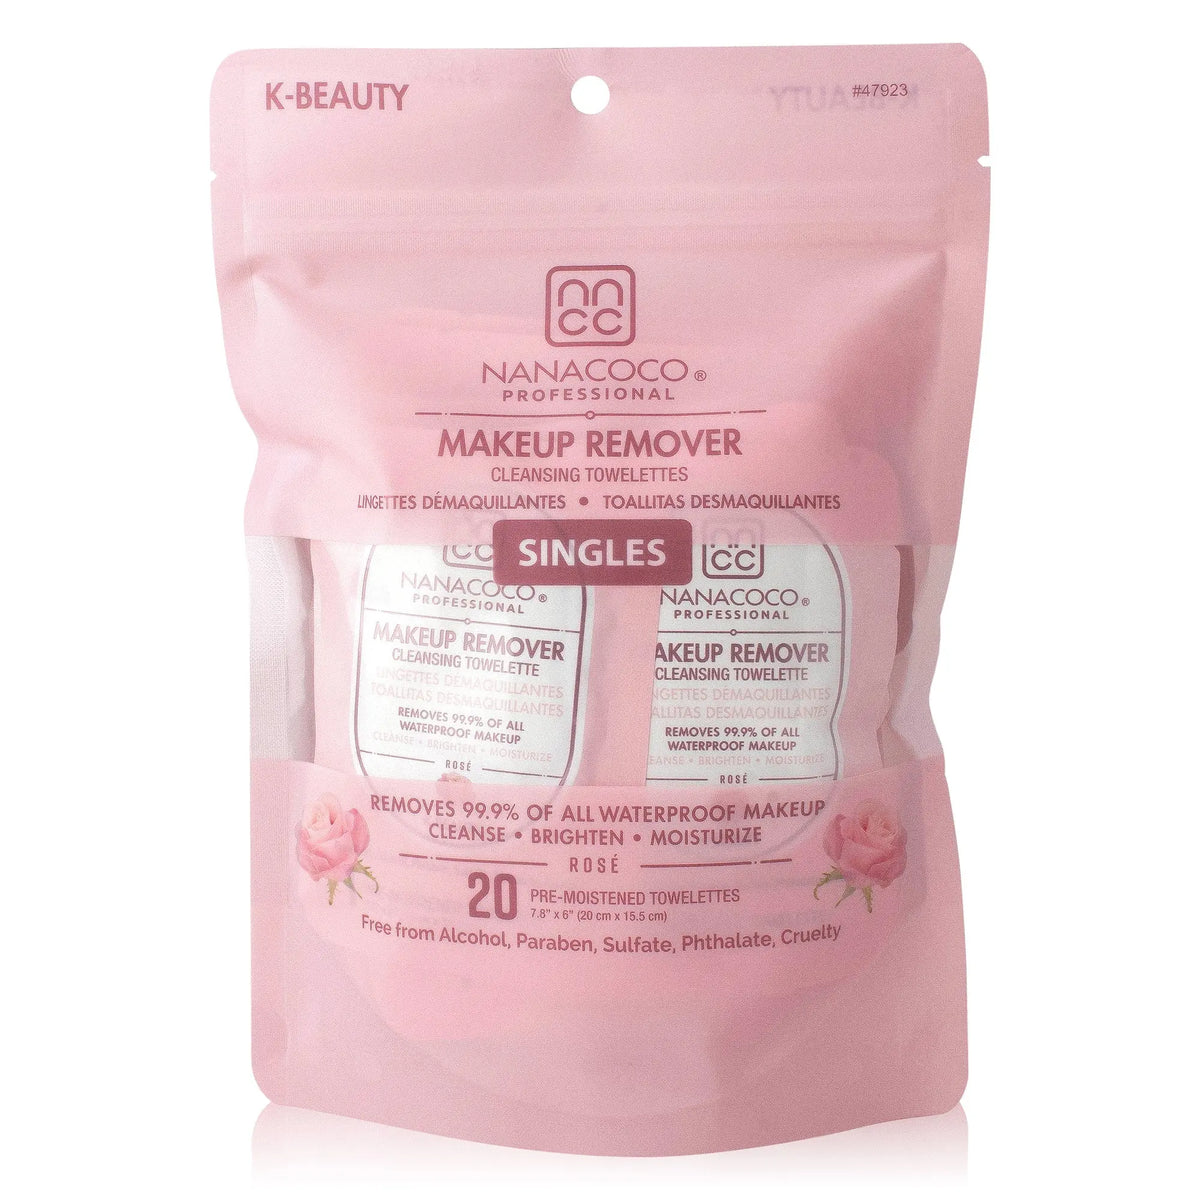 NANACOCO Makeup Remover Cleansing Towlettes (20xSingles) % | product_vendor%